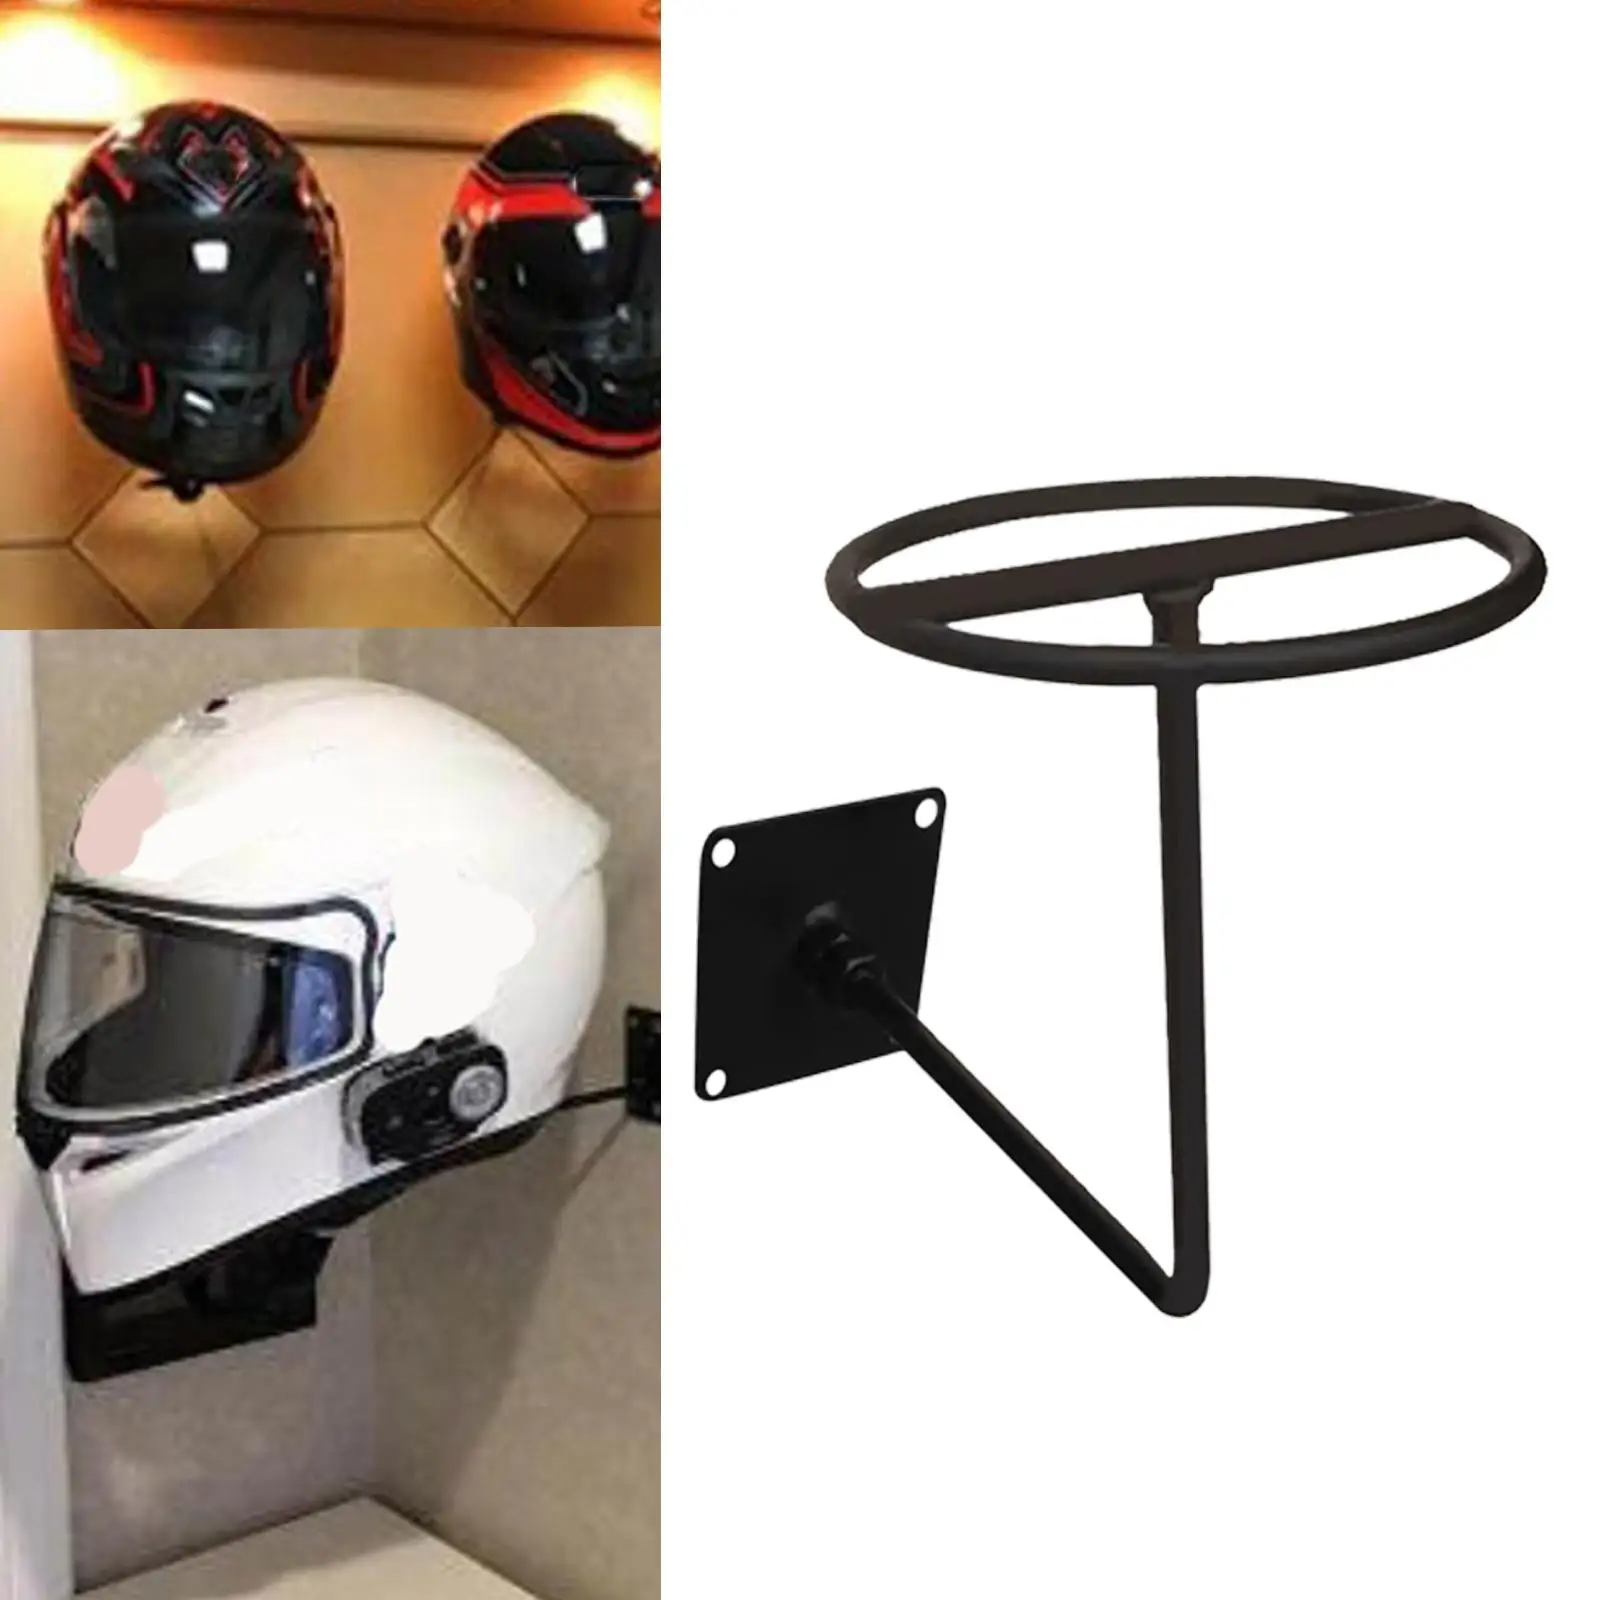 Helmet Holder Accessories Wall Mounted Hook er Fit for Coats Caps Home